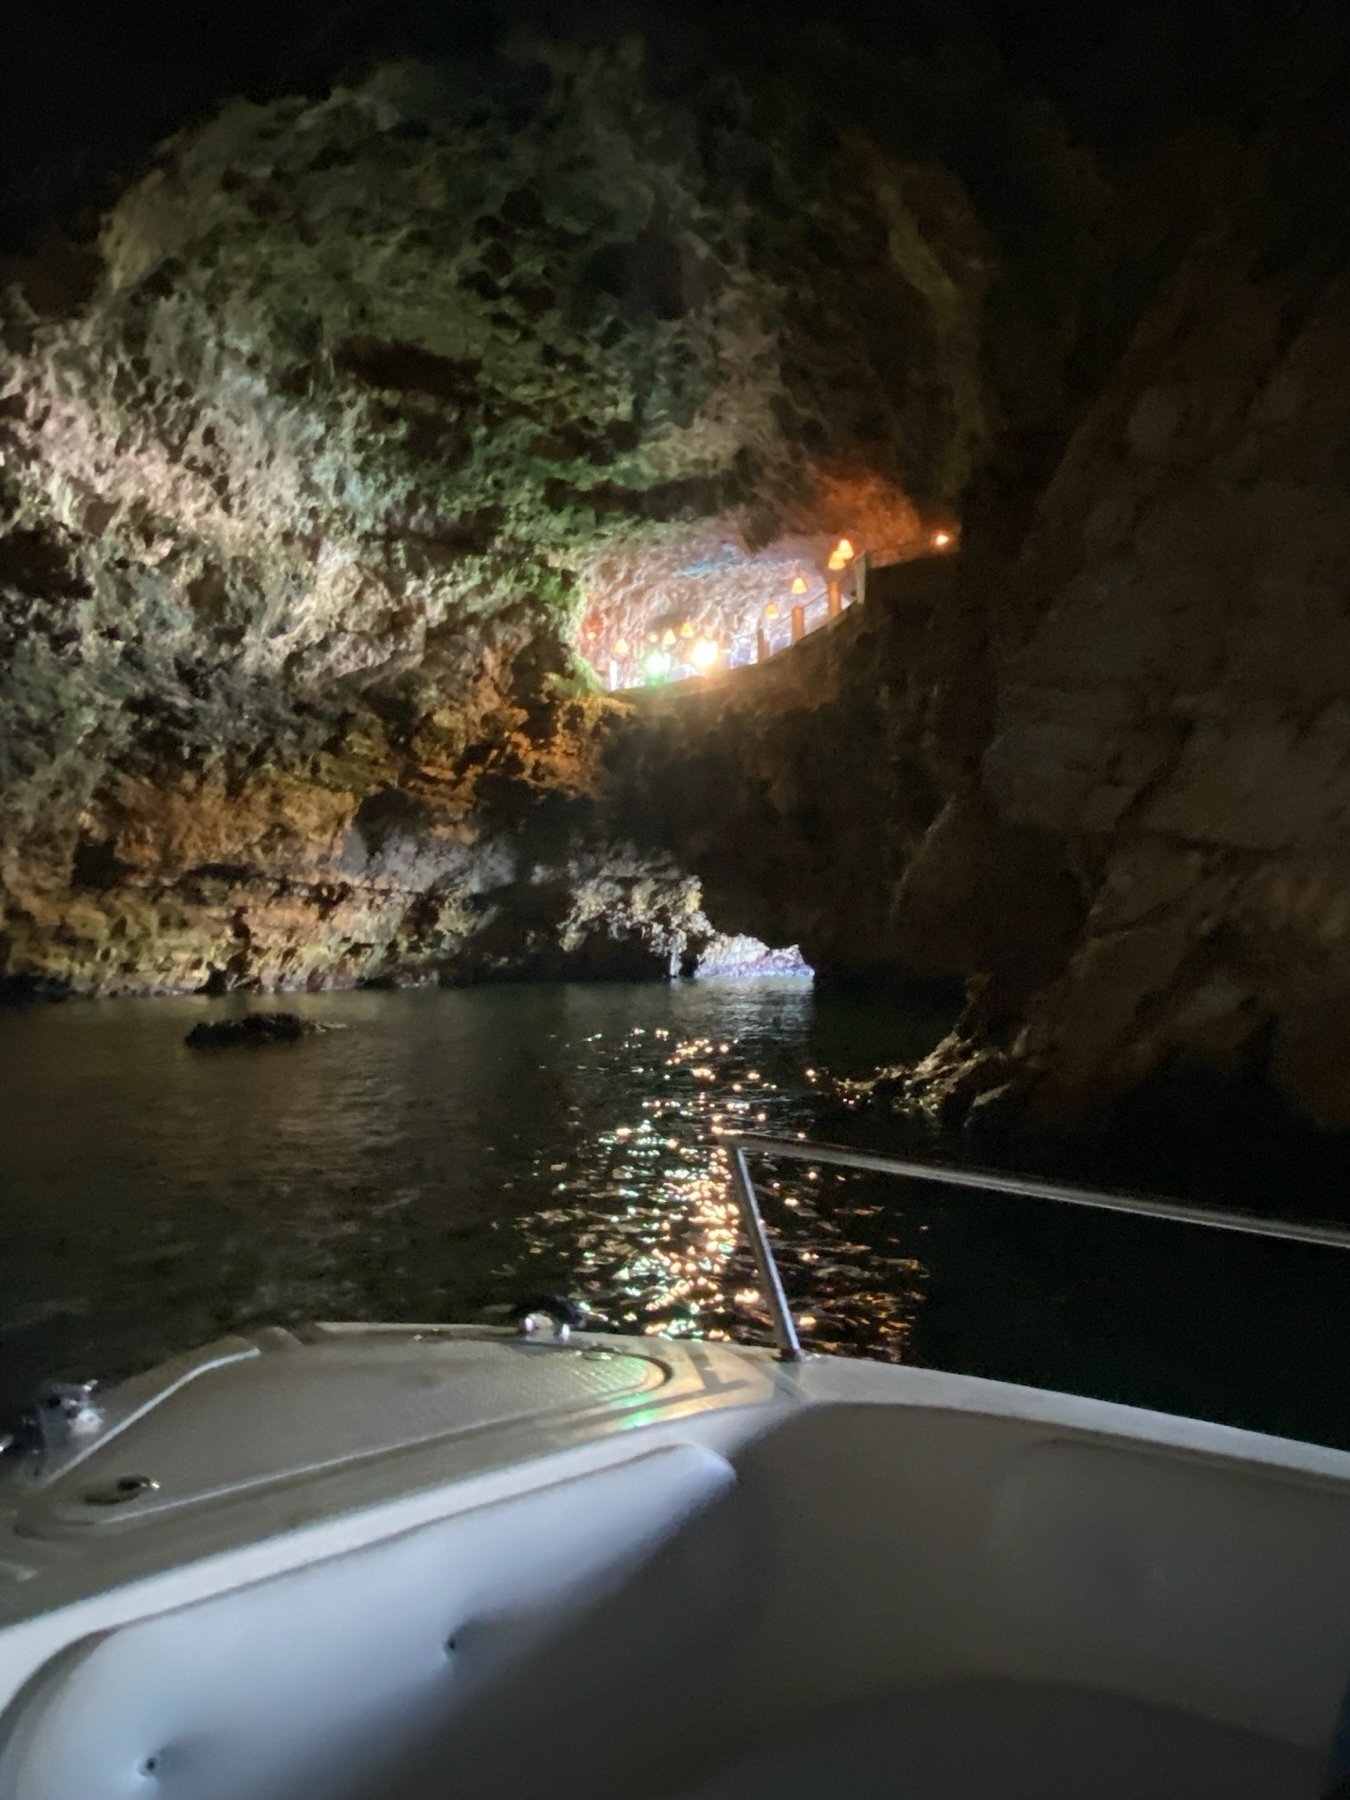 A boat is shown inside a dimly lit cave, with colorful lights illuminating an interior pathway and rocky walls.